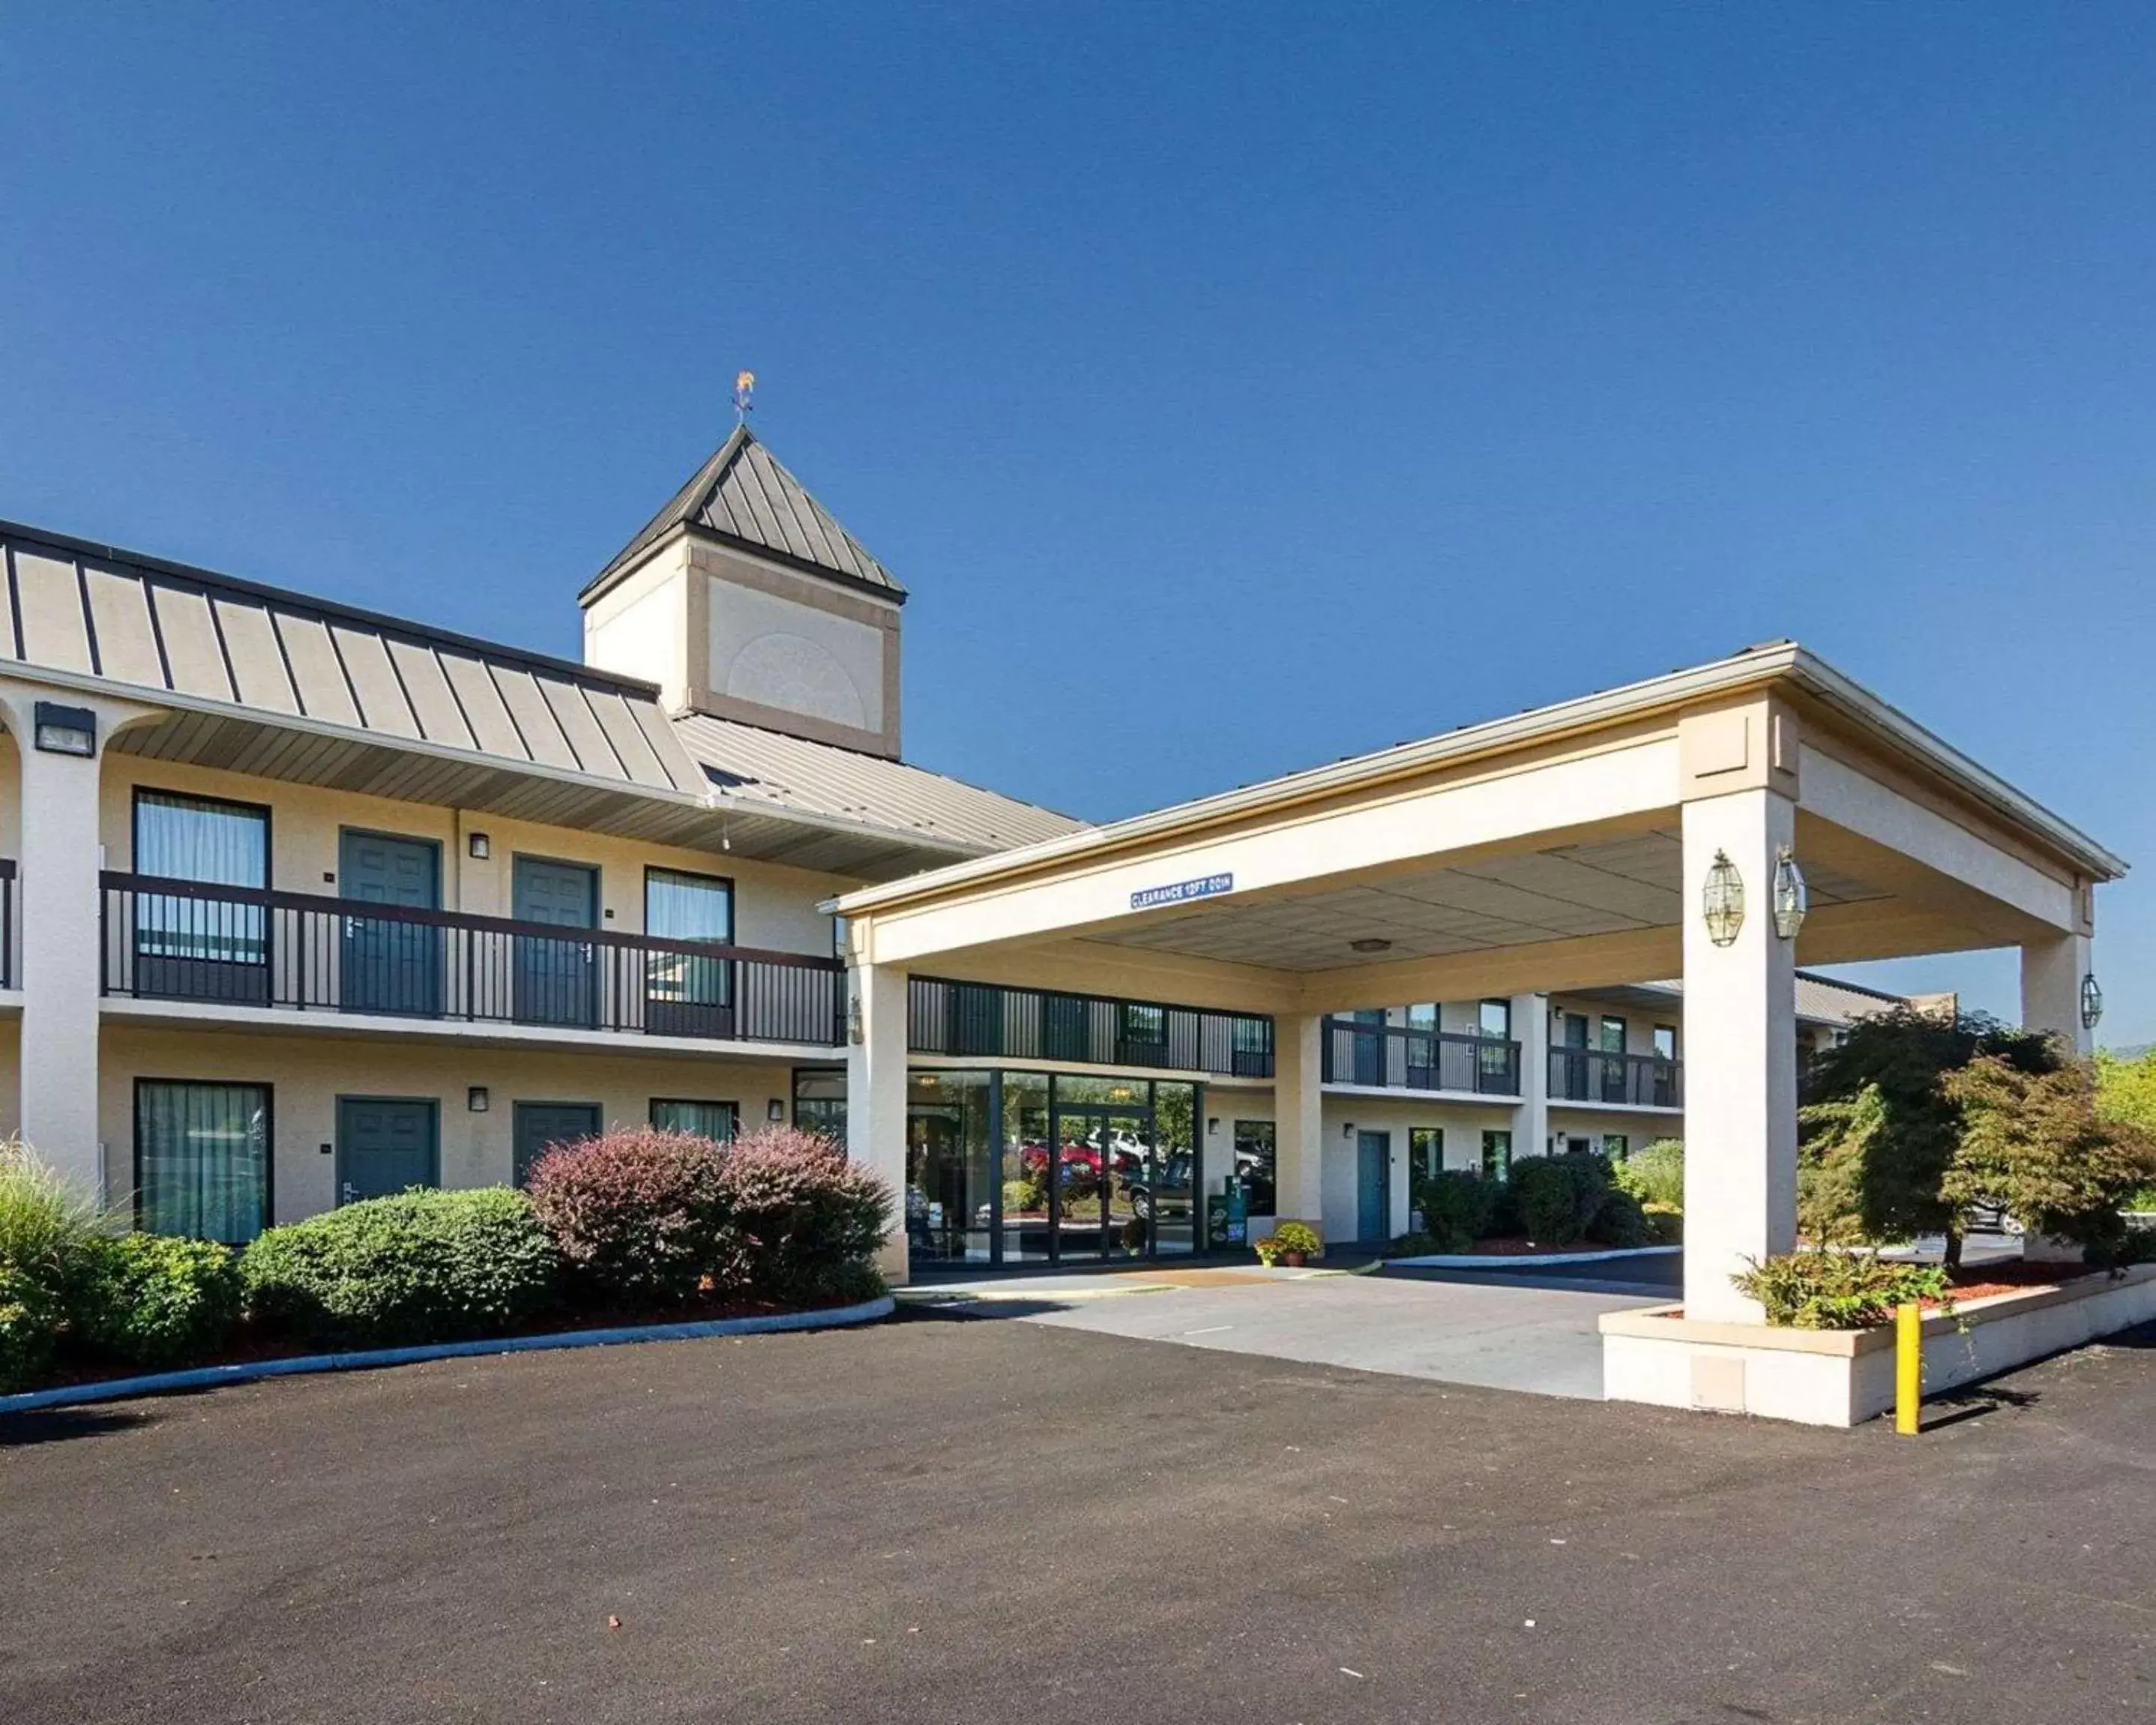 Property Building in Quality Inn Troutville - Roanoke North